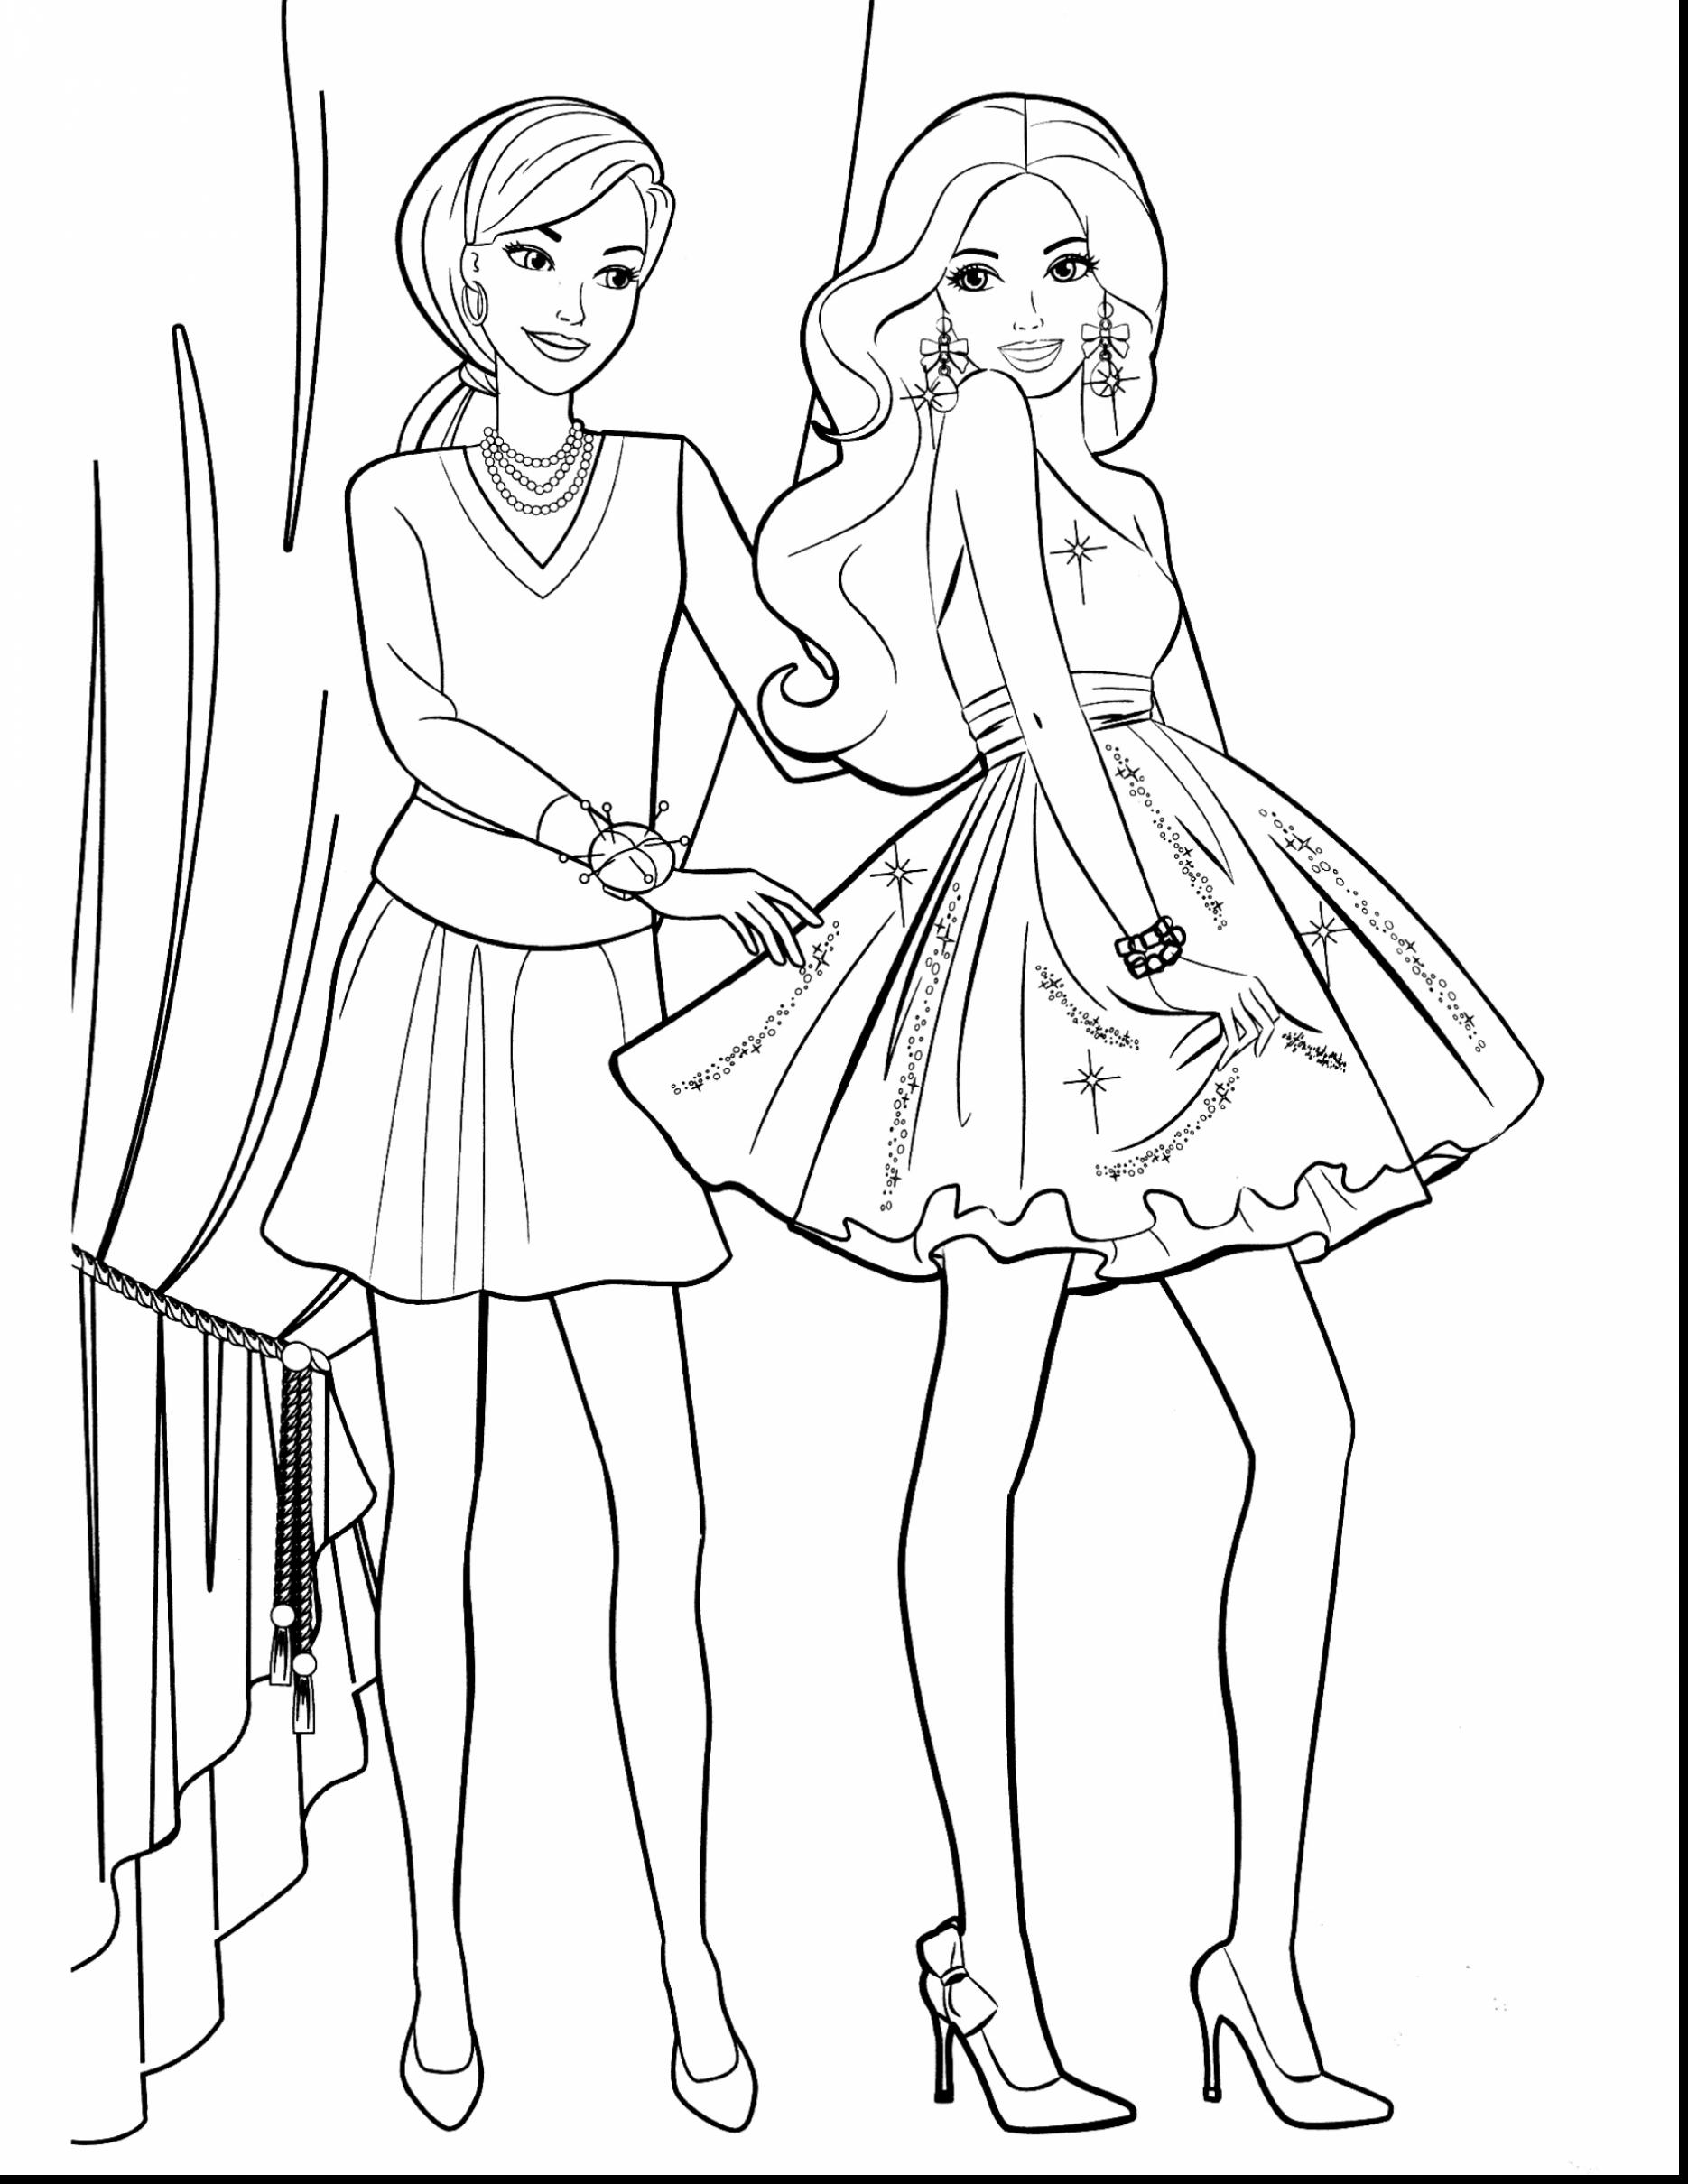 Printable Barbie And Friends Coloring Pages Pdf - Free Barbie And Friends Coloring Pages